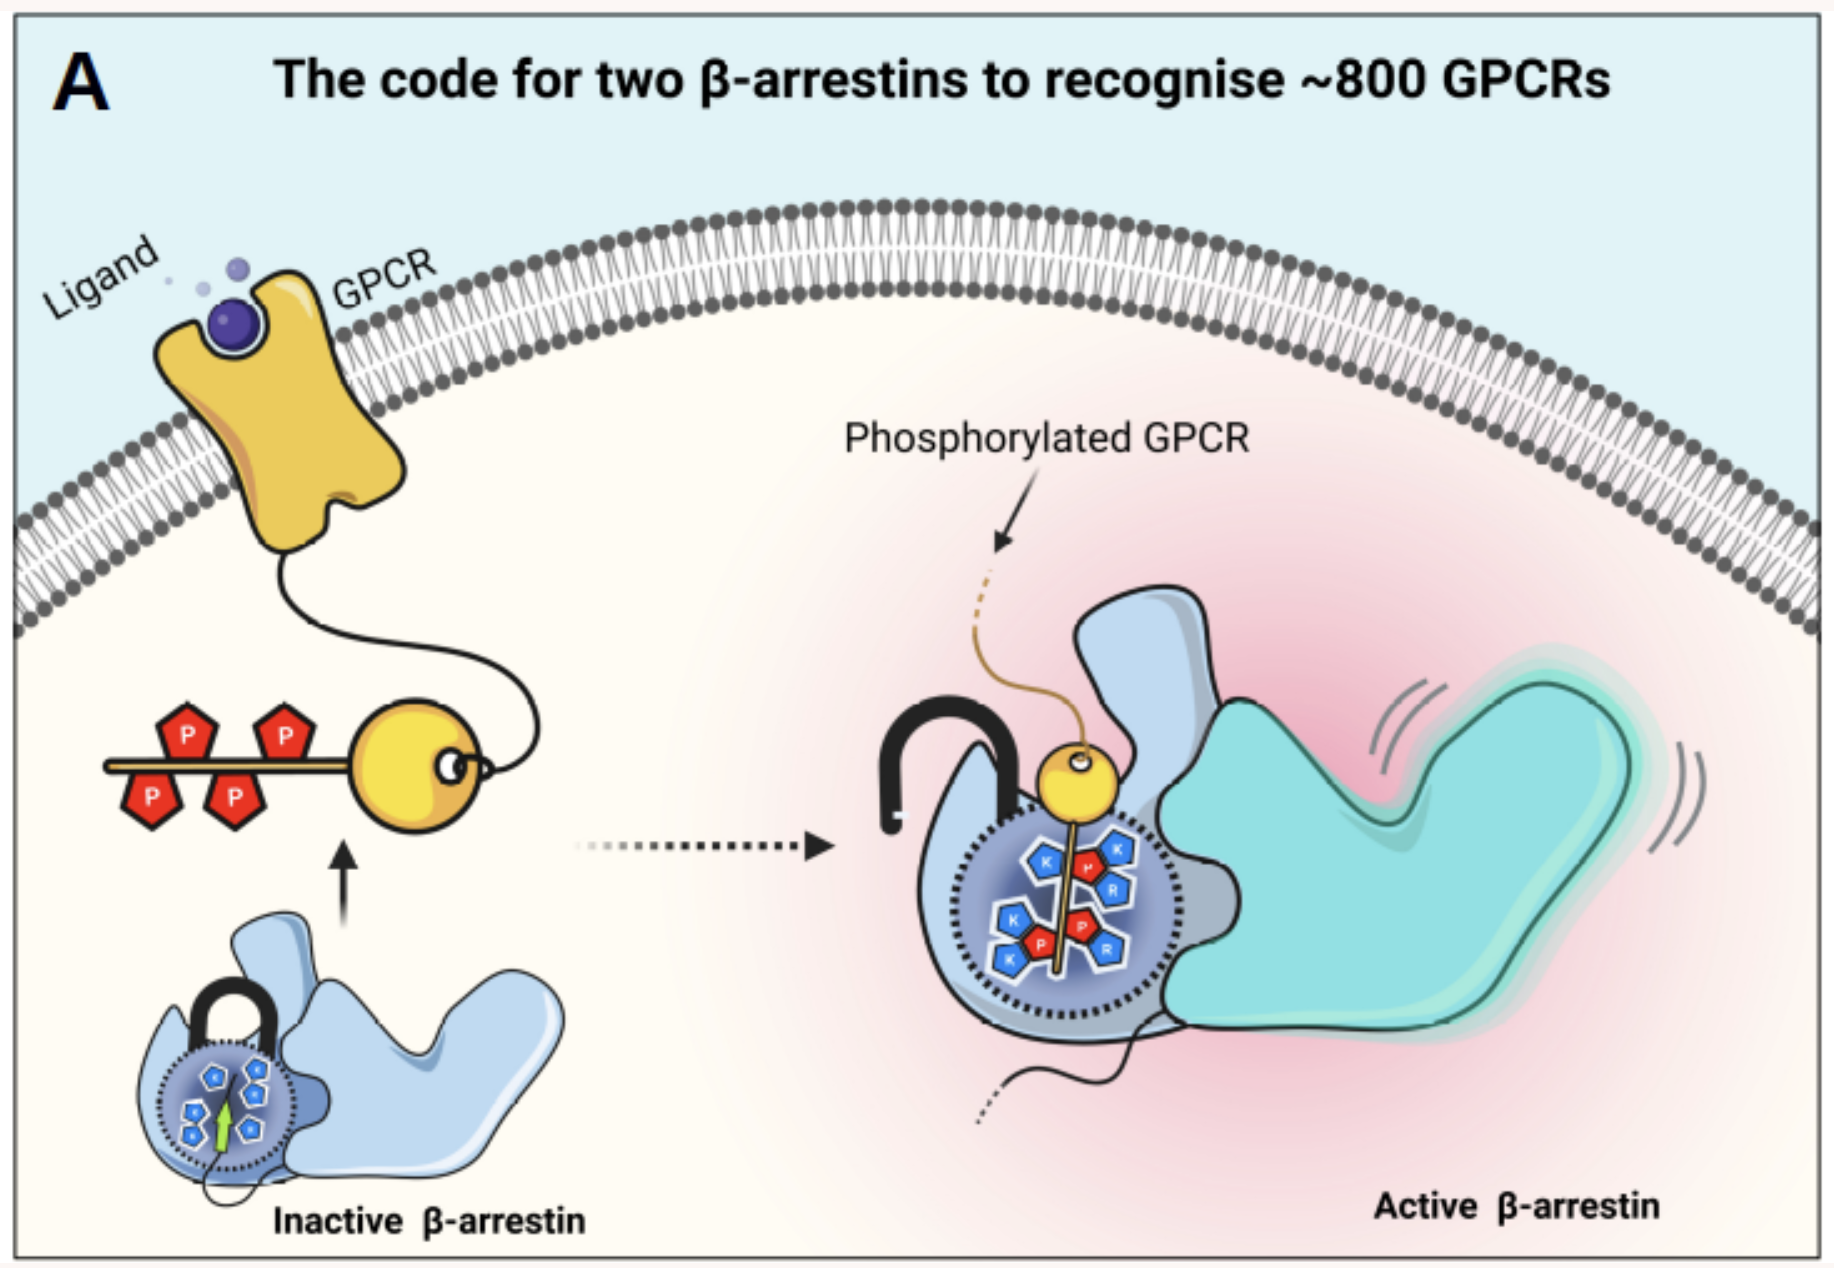 There are nearly a thousand of GPCRs which are regulated by only two beta-arrestins. A GPCR master key opens up the locks on β-arrestins to activate and subequent functional outcomes.